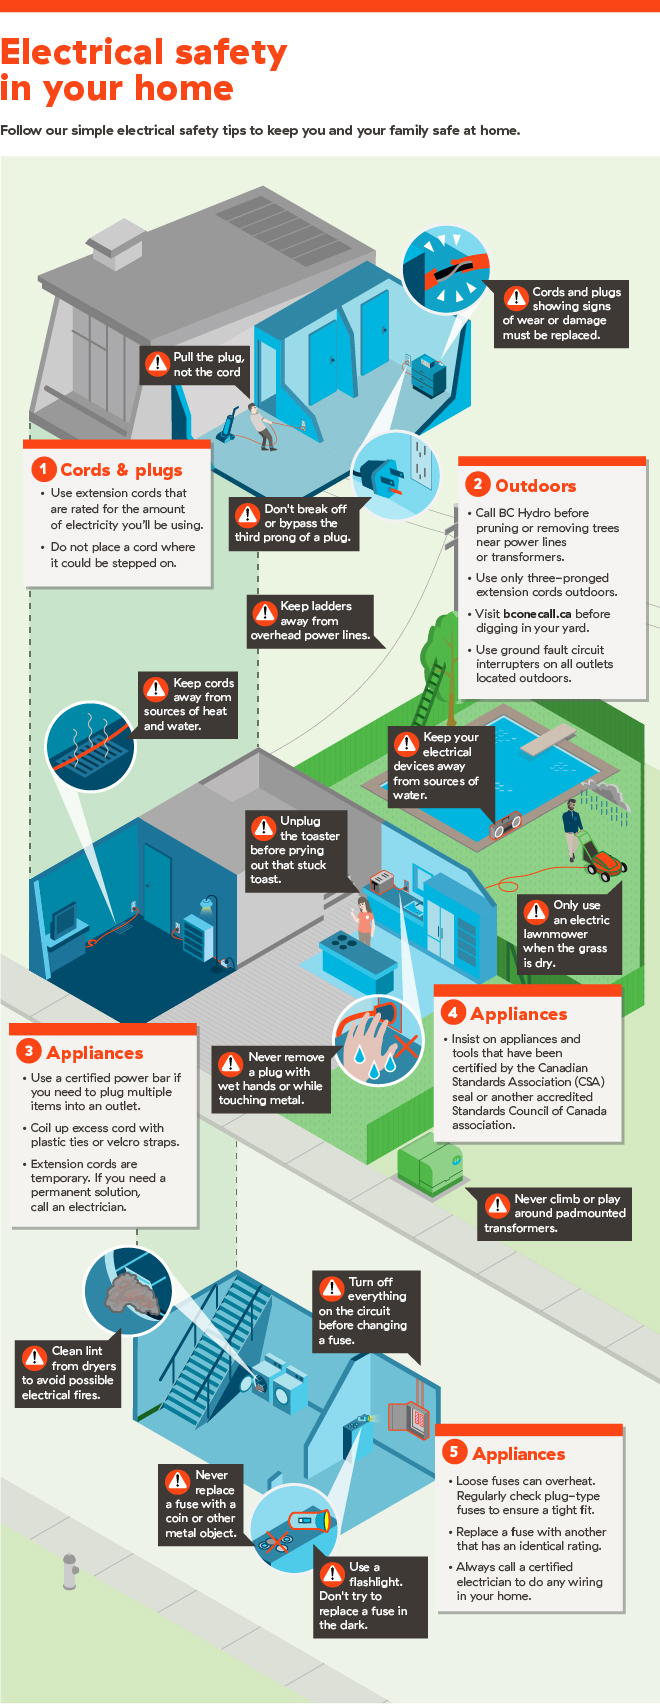 Electrical safety in your home infographic